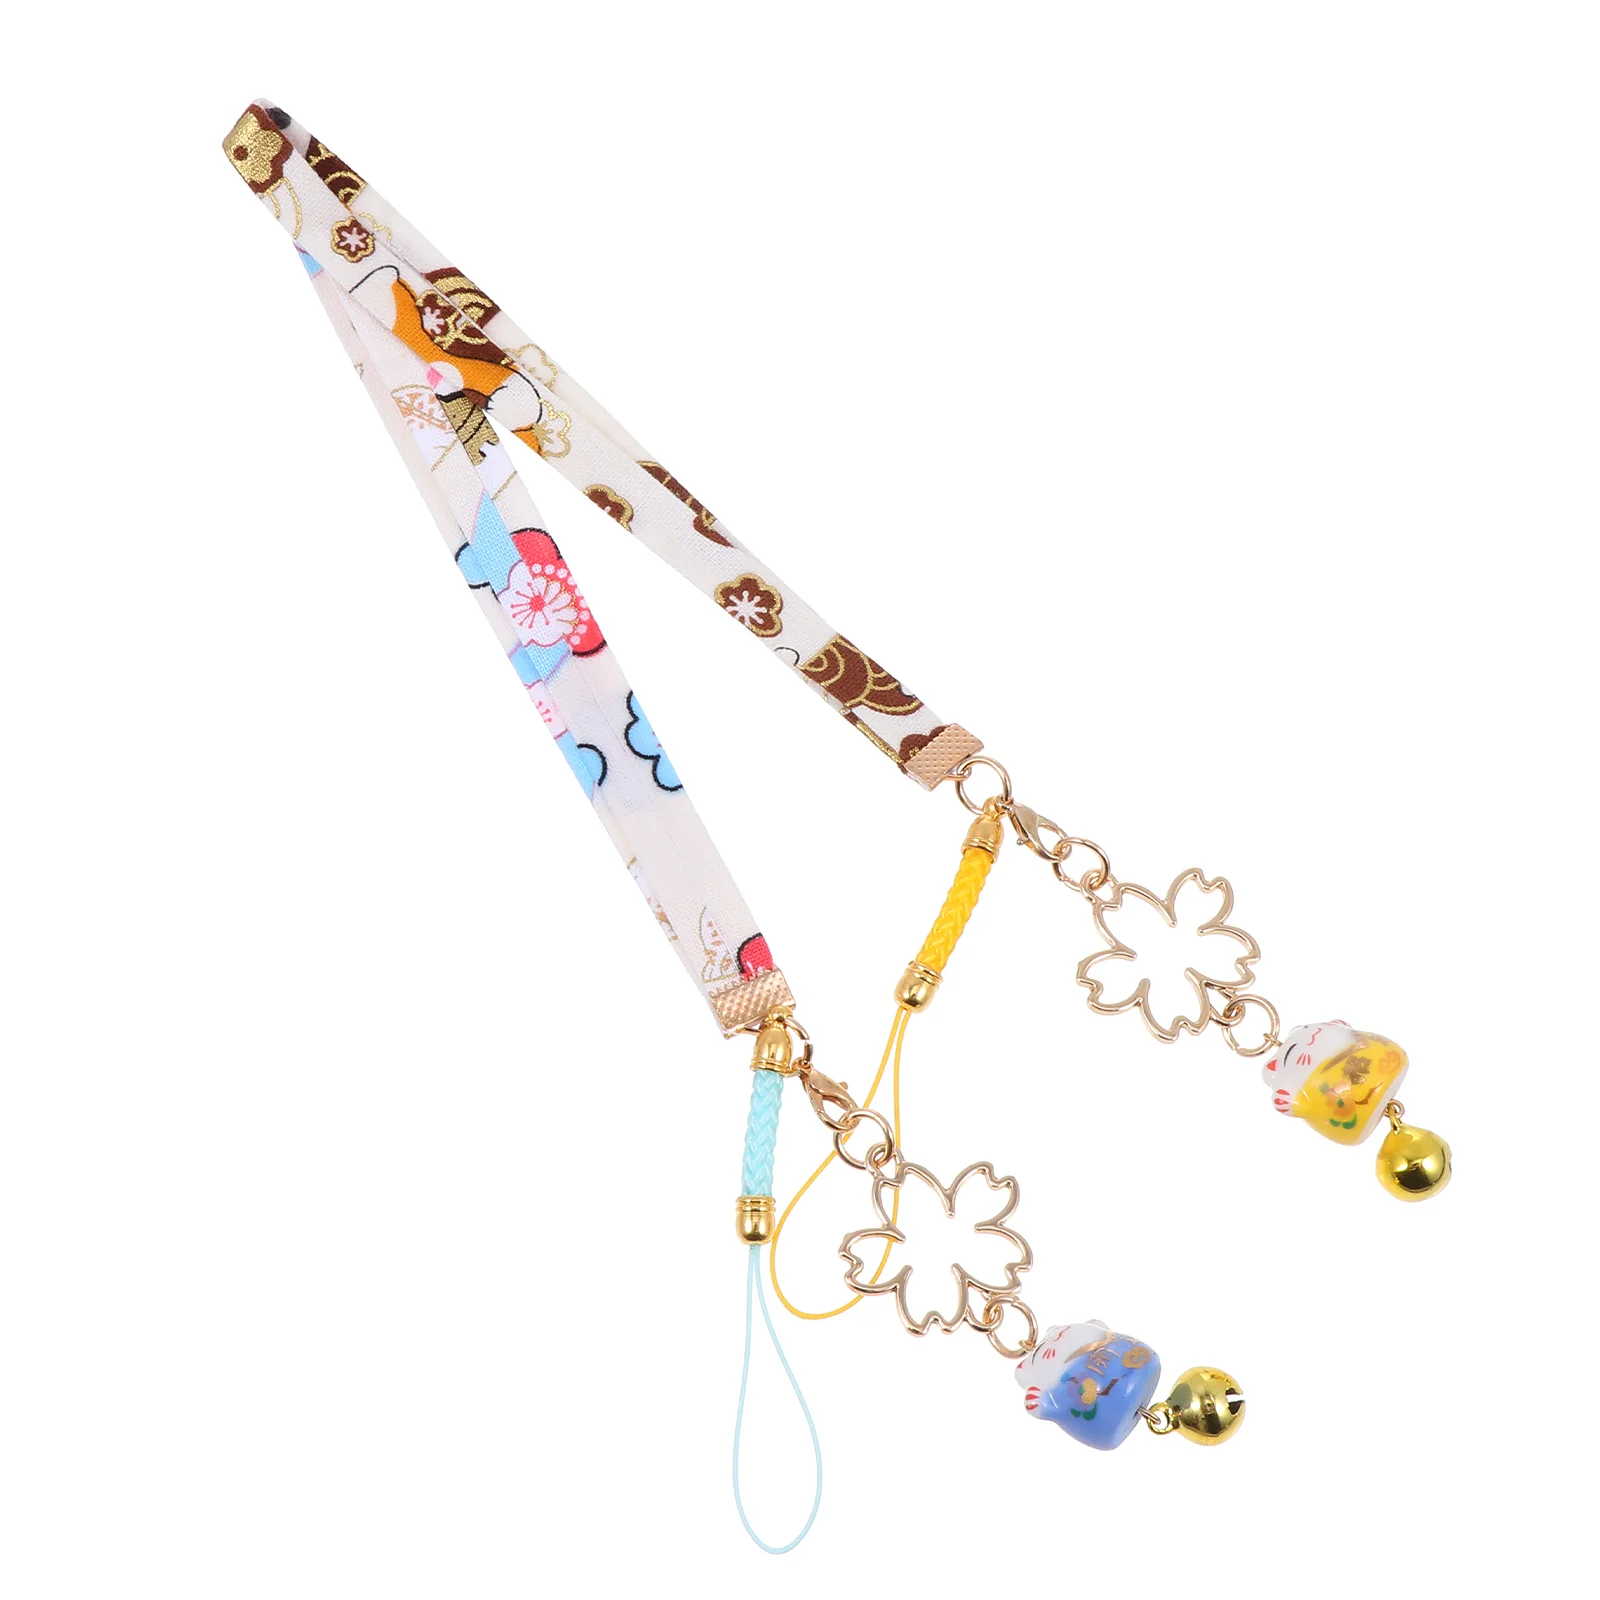 

Lanyard Strap Hanging Charm Ropechain Charms Wrist Pendant Cat Cell Beaded Keychain Lanyards Bell Universal Fortune Cellphone